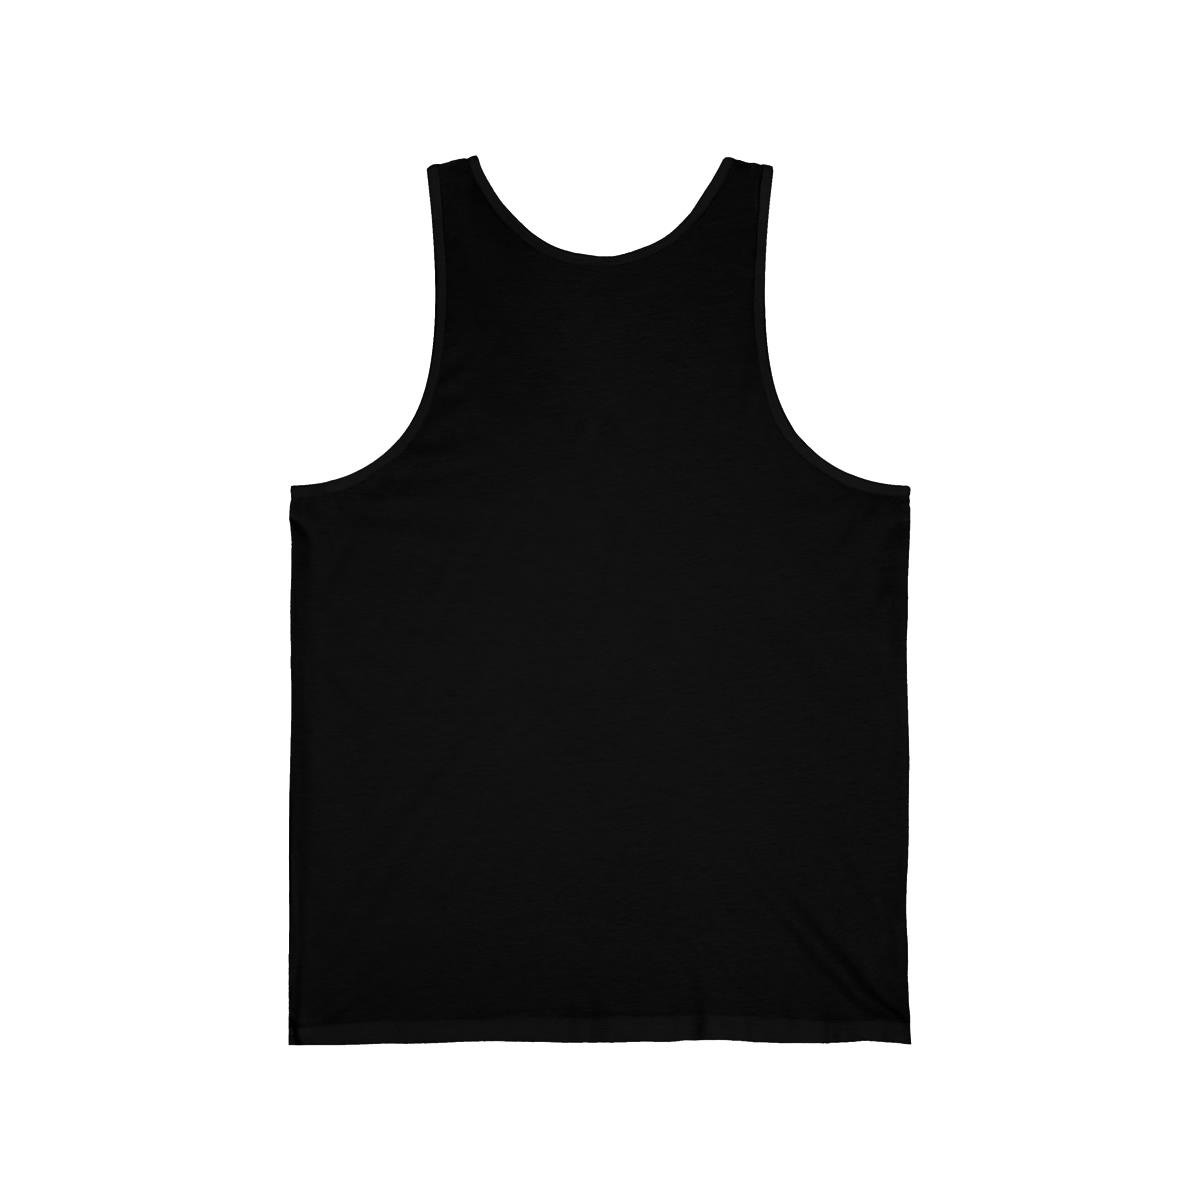 Brotality Stacked Logos Unisex Jersey Tank